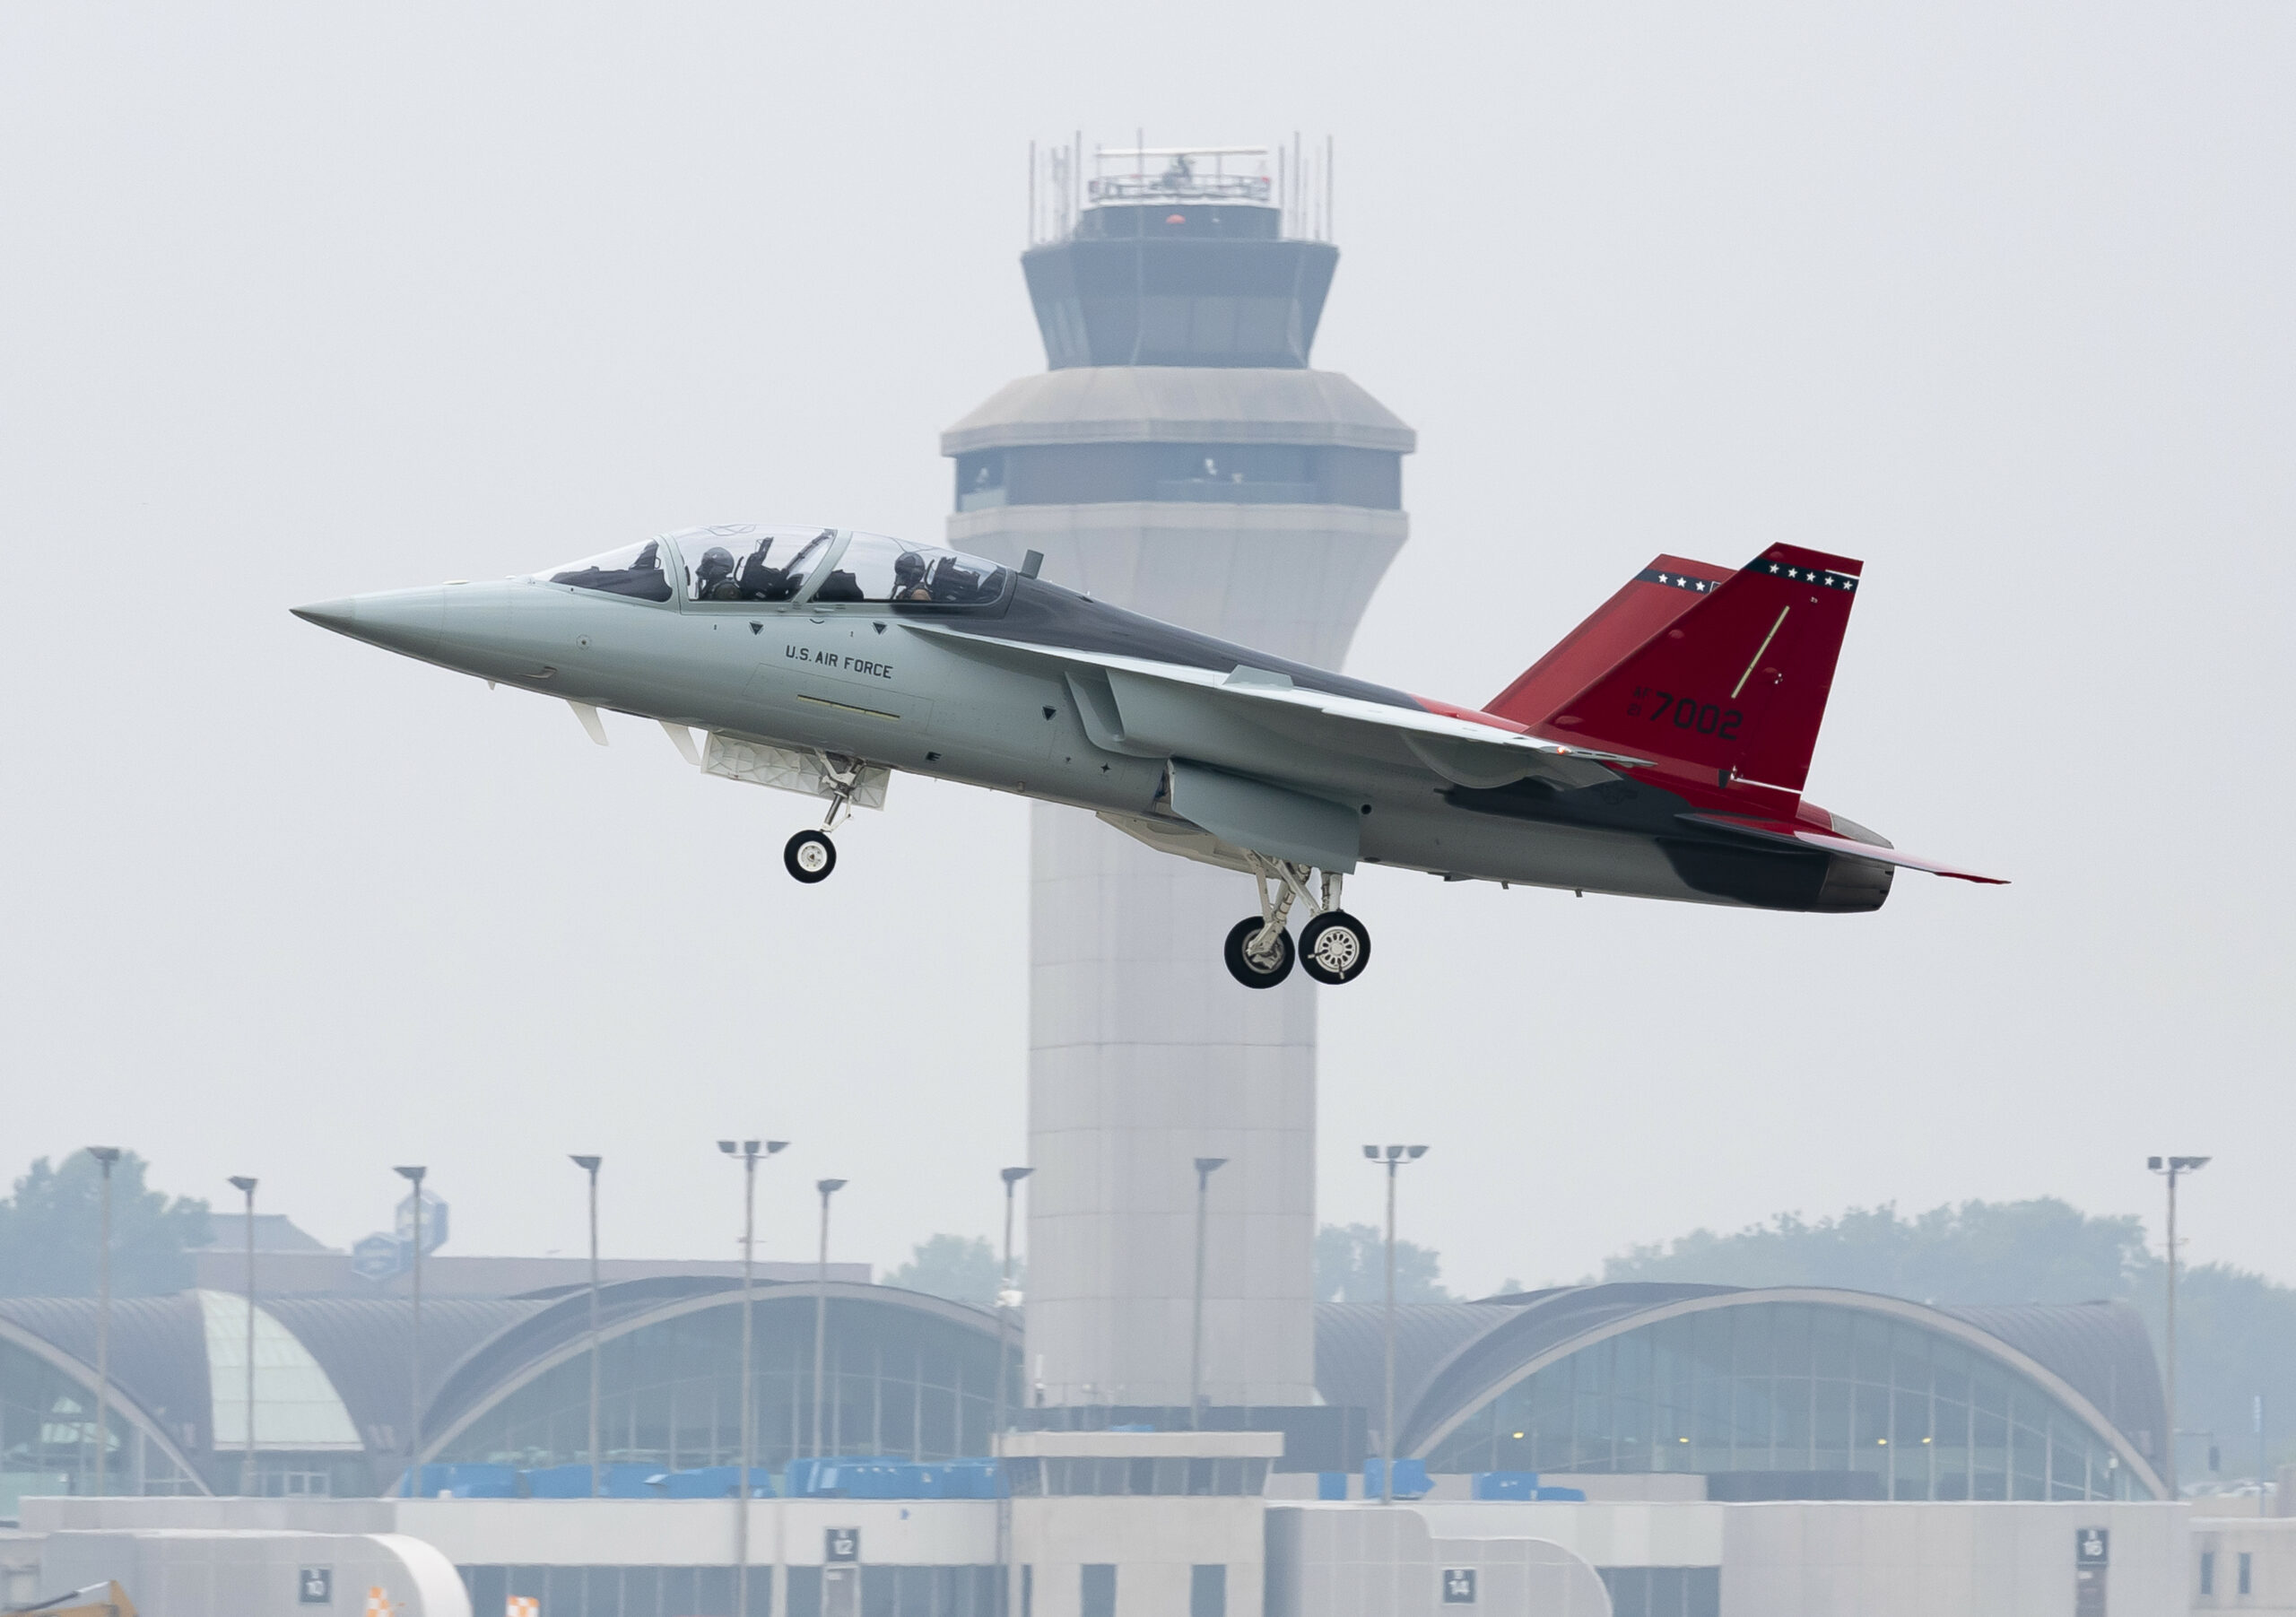 A T-7A Red Hawk is seen taking off from an airport. The words "US Air Force" are painted on its body, on the side of the cockpit. Its red tails have the number 7002 painted in black. An airport tower is seen in the background.